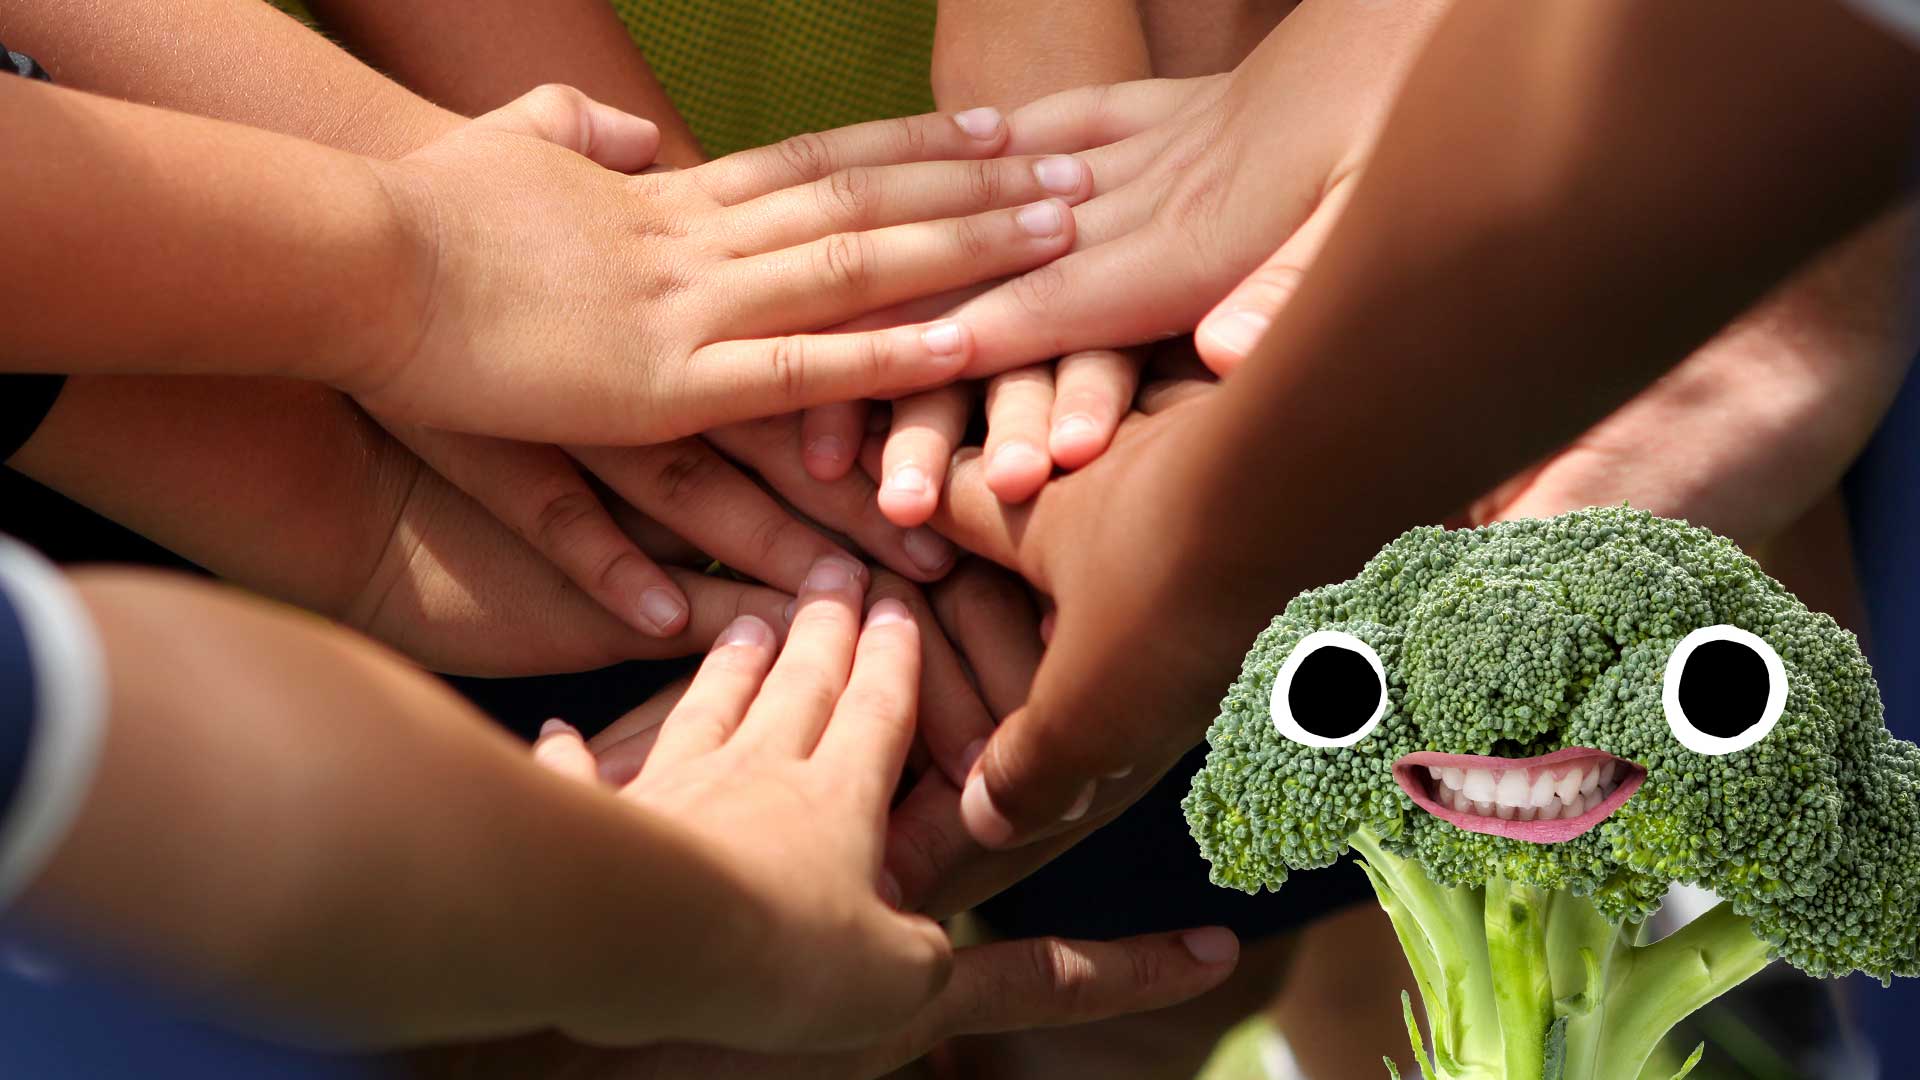 A team joining hands, while a piece of broccoli looks on